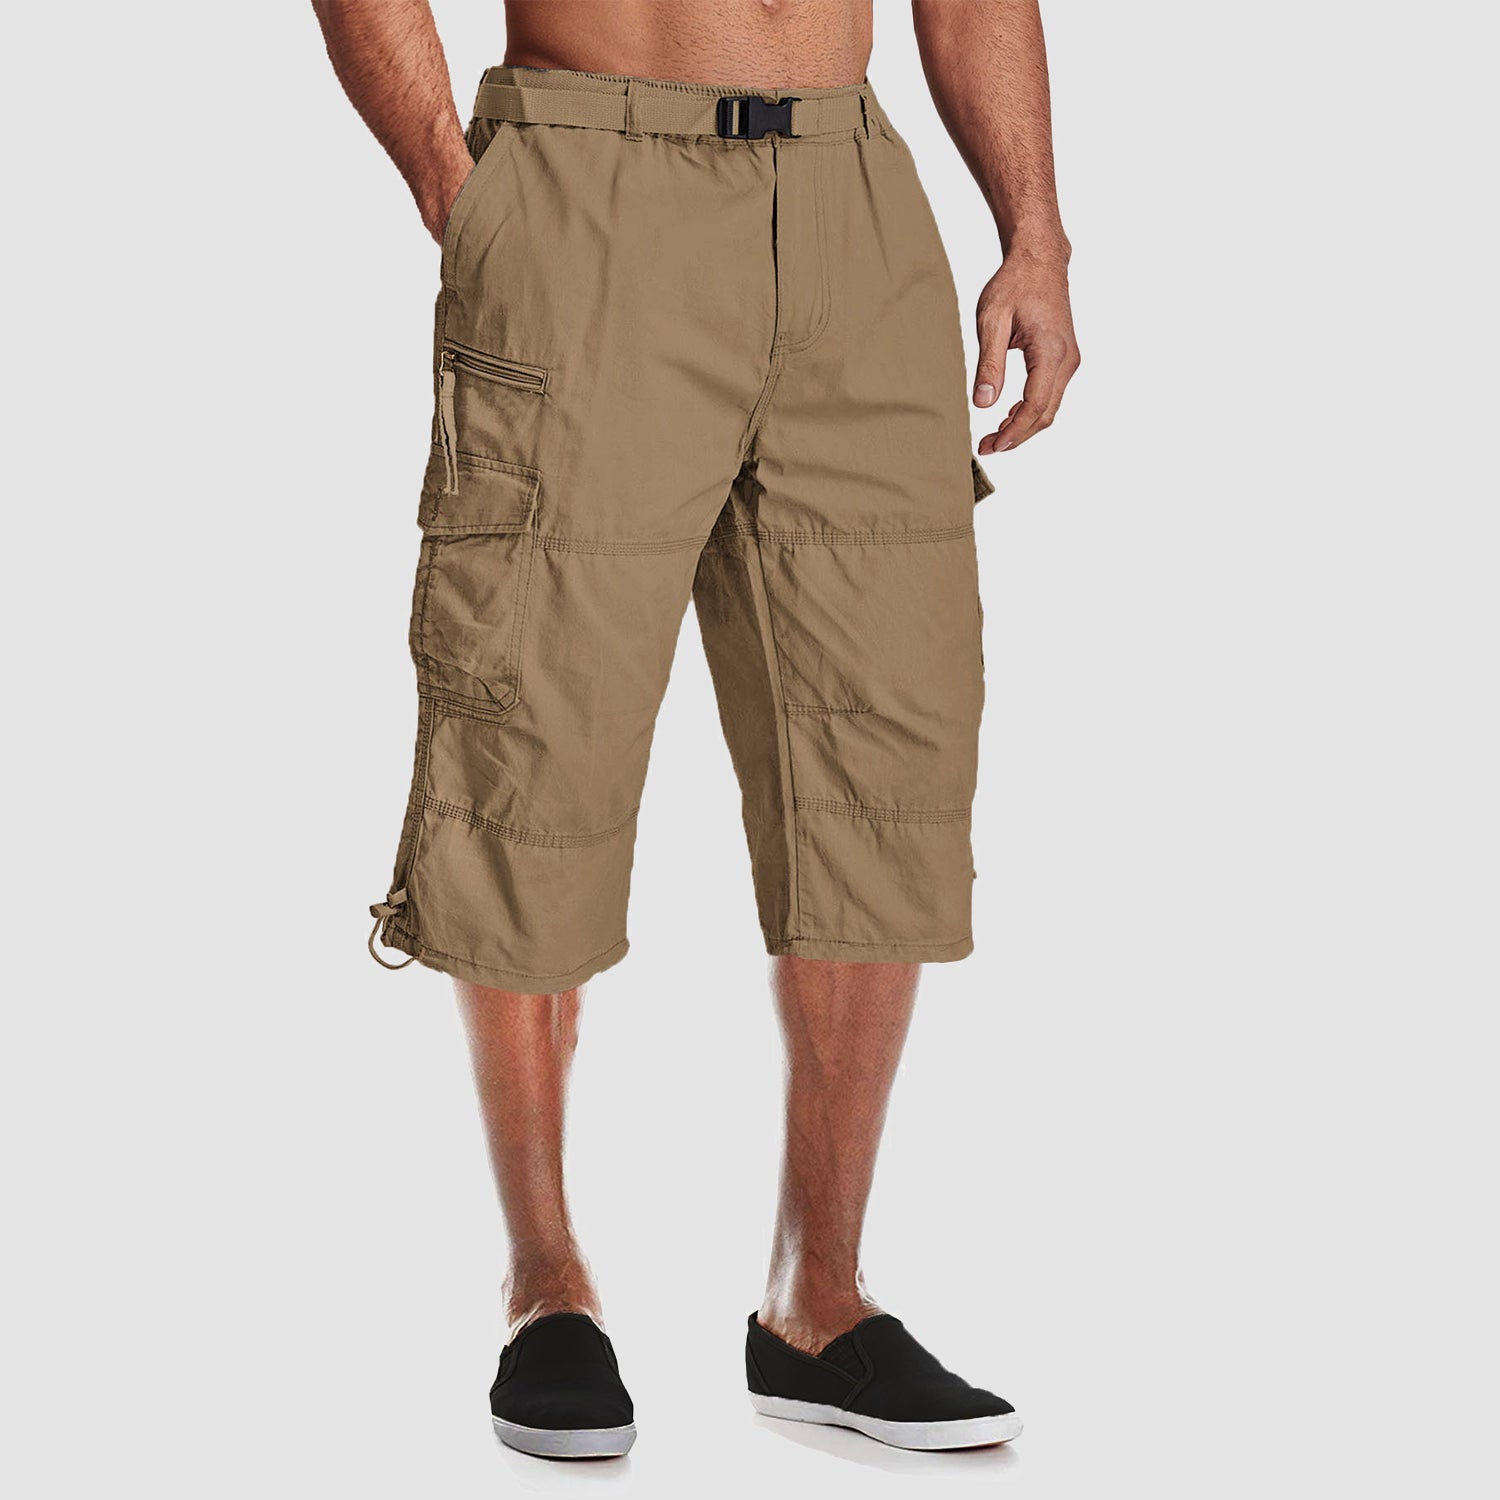 Men's Hiking Pants Quick Dry 3/4 Pants Capri Shorts for Travel Casual –  Little Donkey Andy